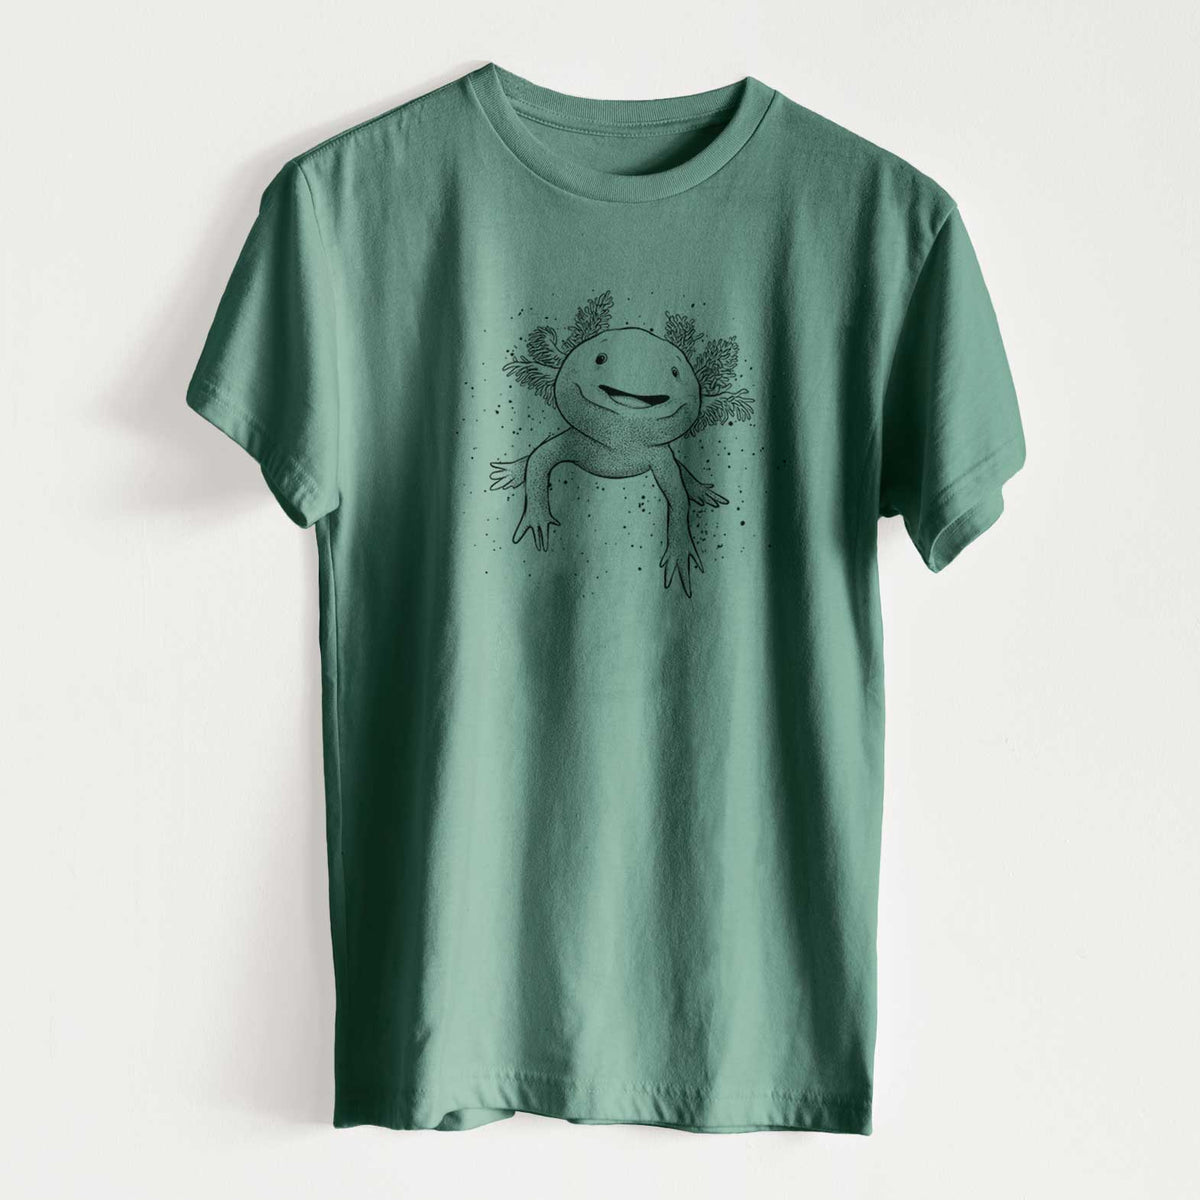 Axolotl - Ambystoma mexicanum - Unisex Recycled Eco Tee  - CLOSEOUT - FINAL SALE